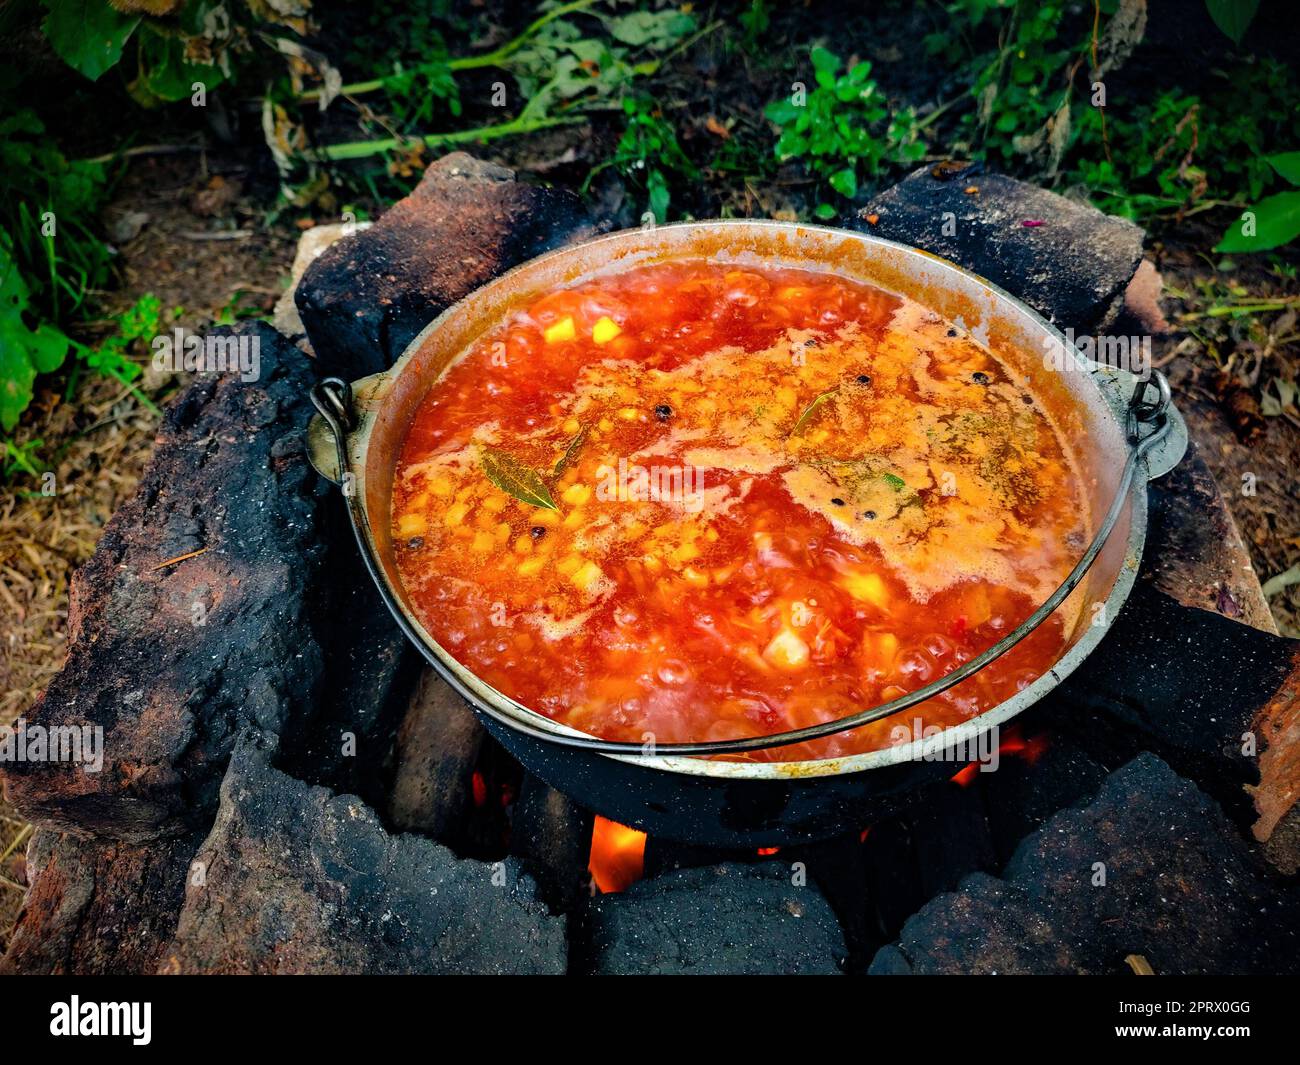 Culinary dish of the national cuisine of Ukraine red borscht. Stock Photo